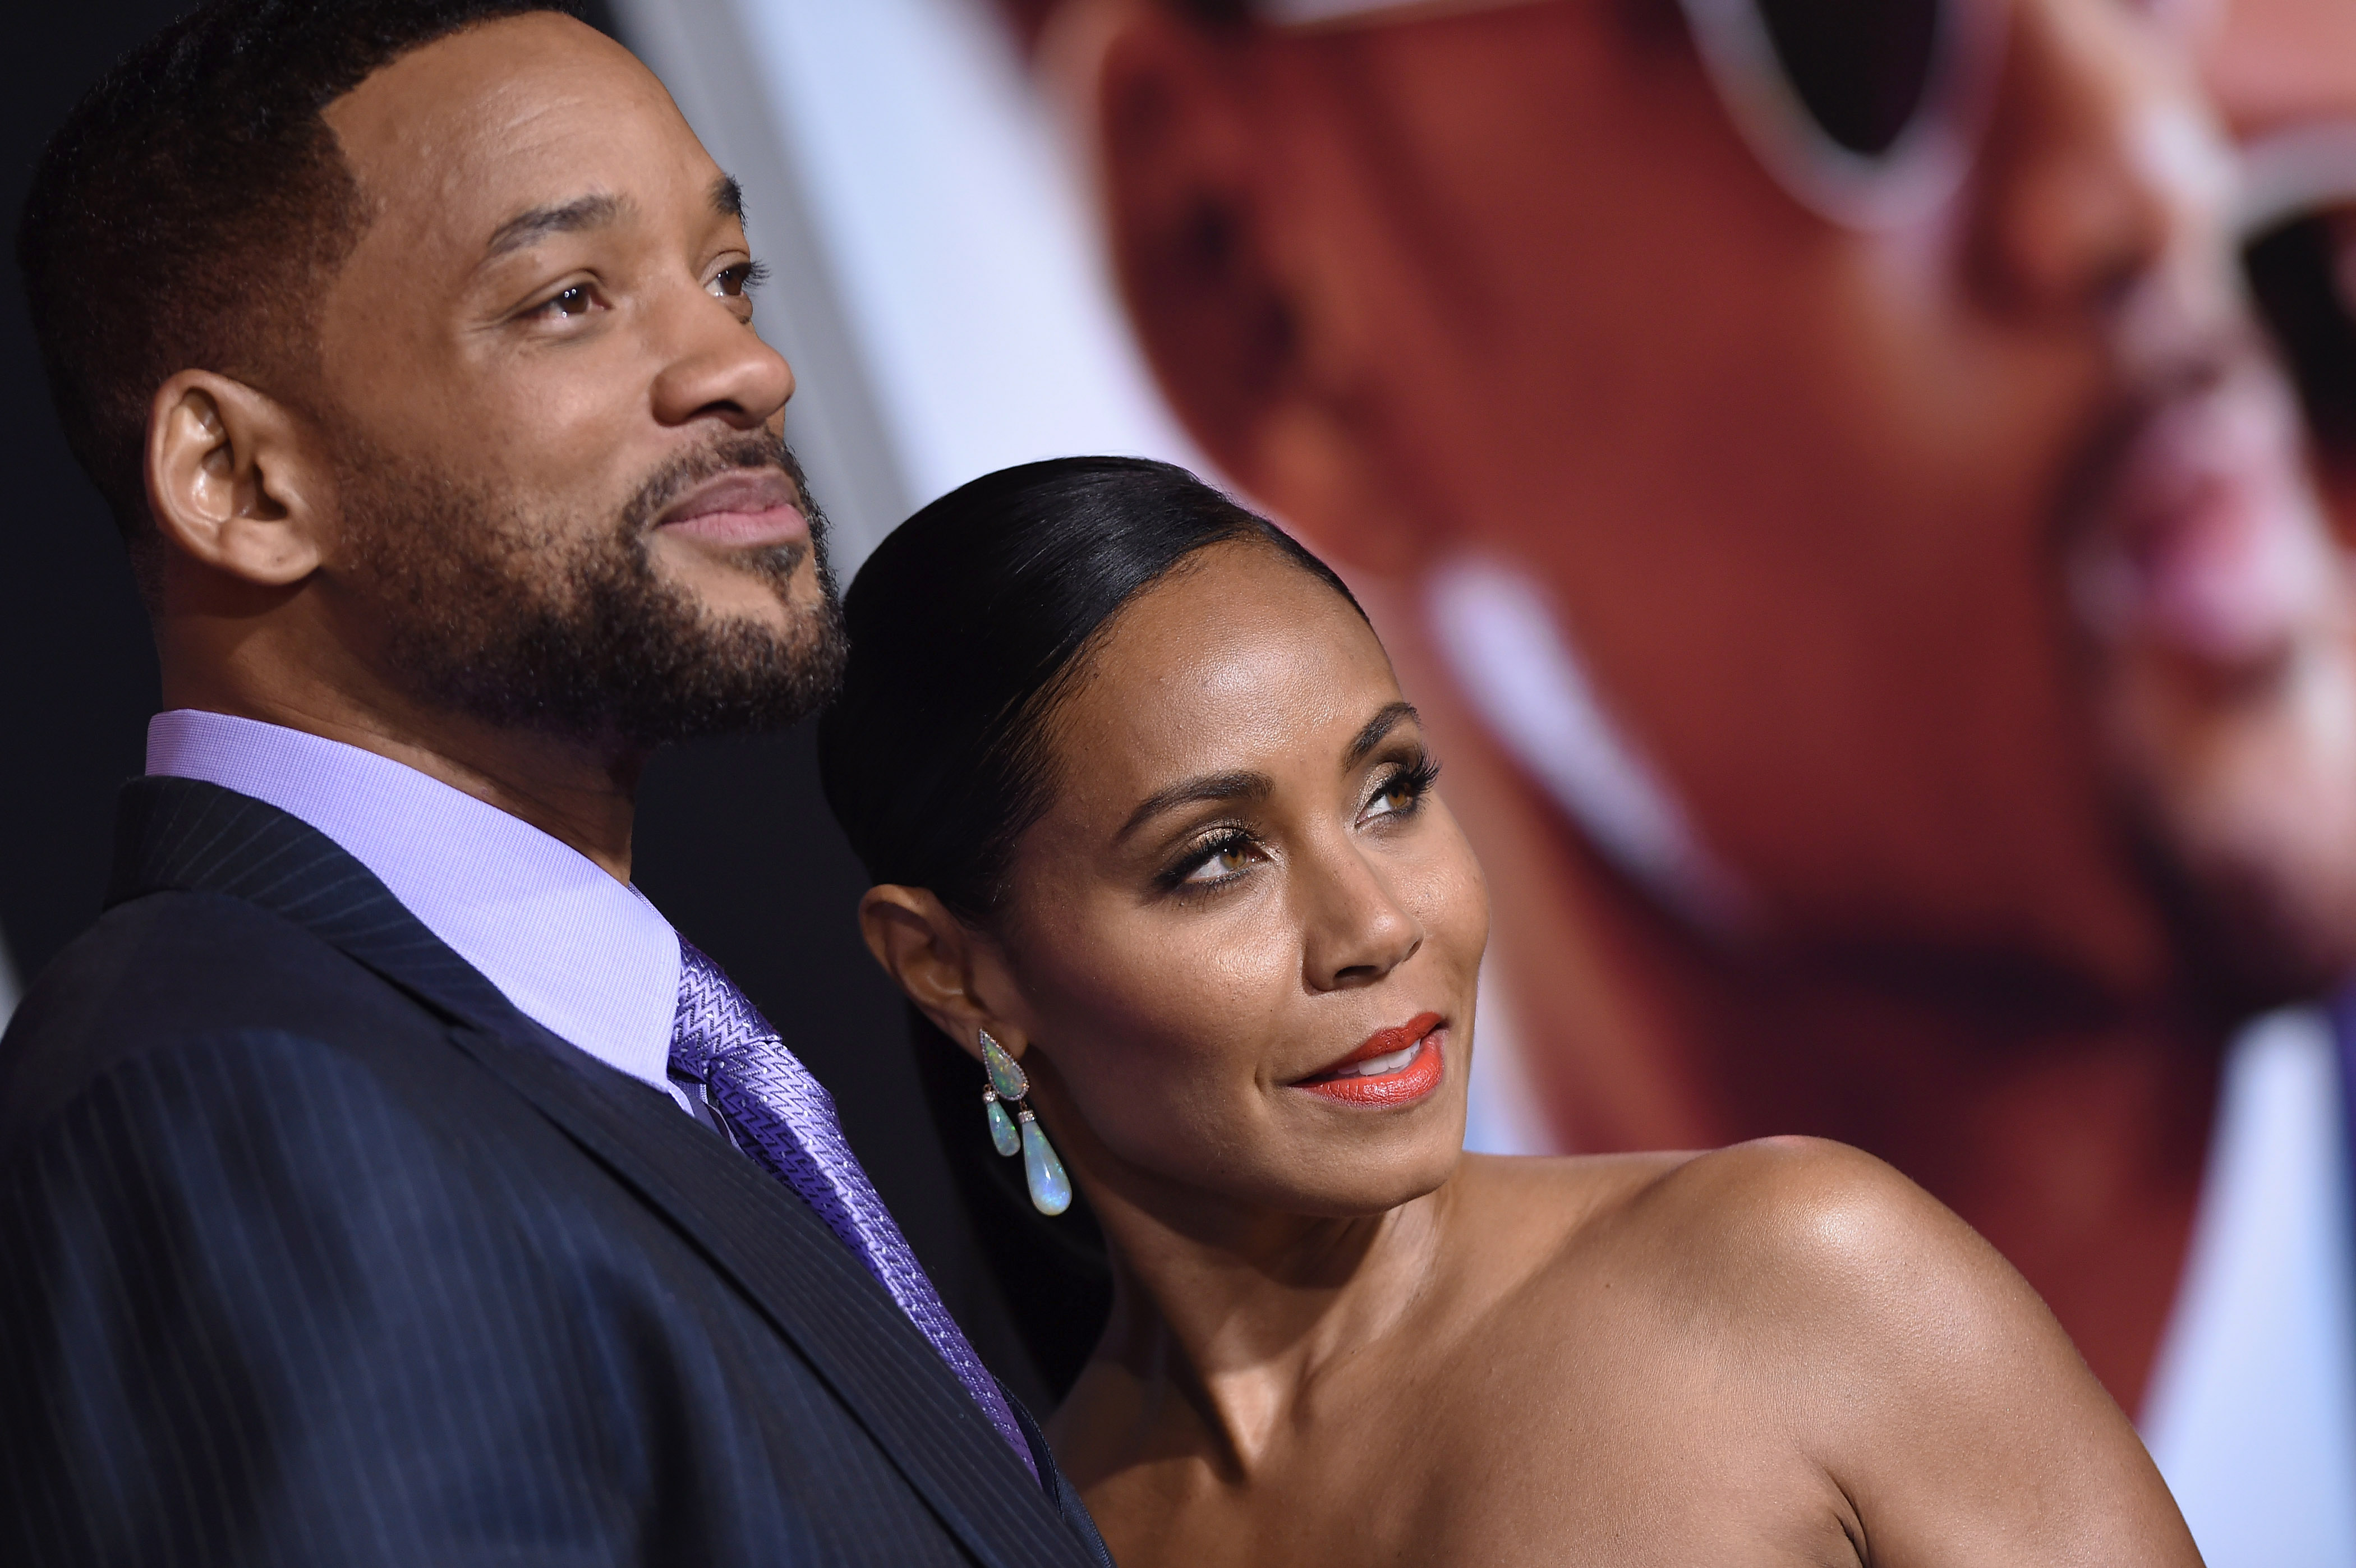 Will Smith and Jada Pinkett Smith pose together on the red carpet.